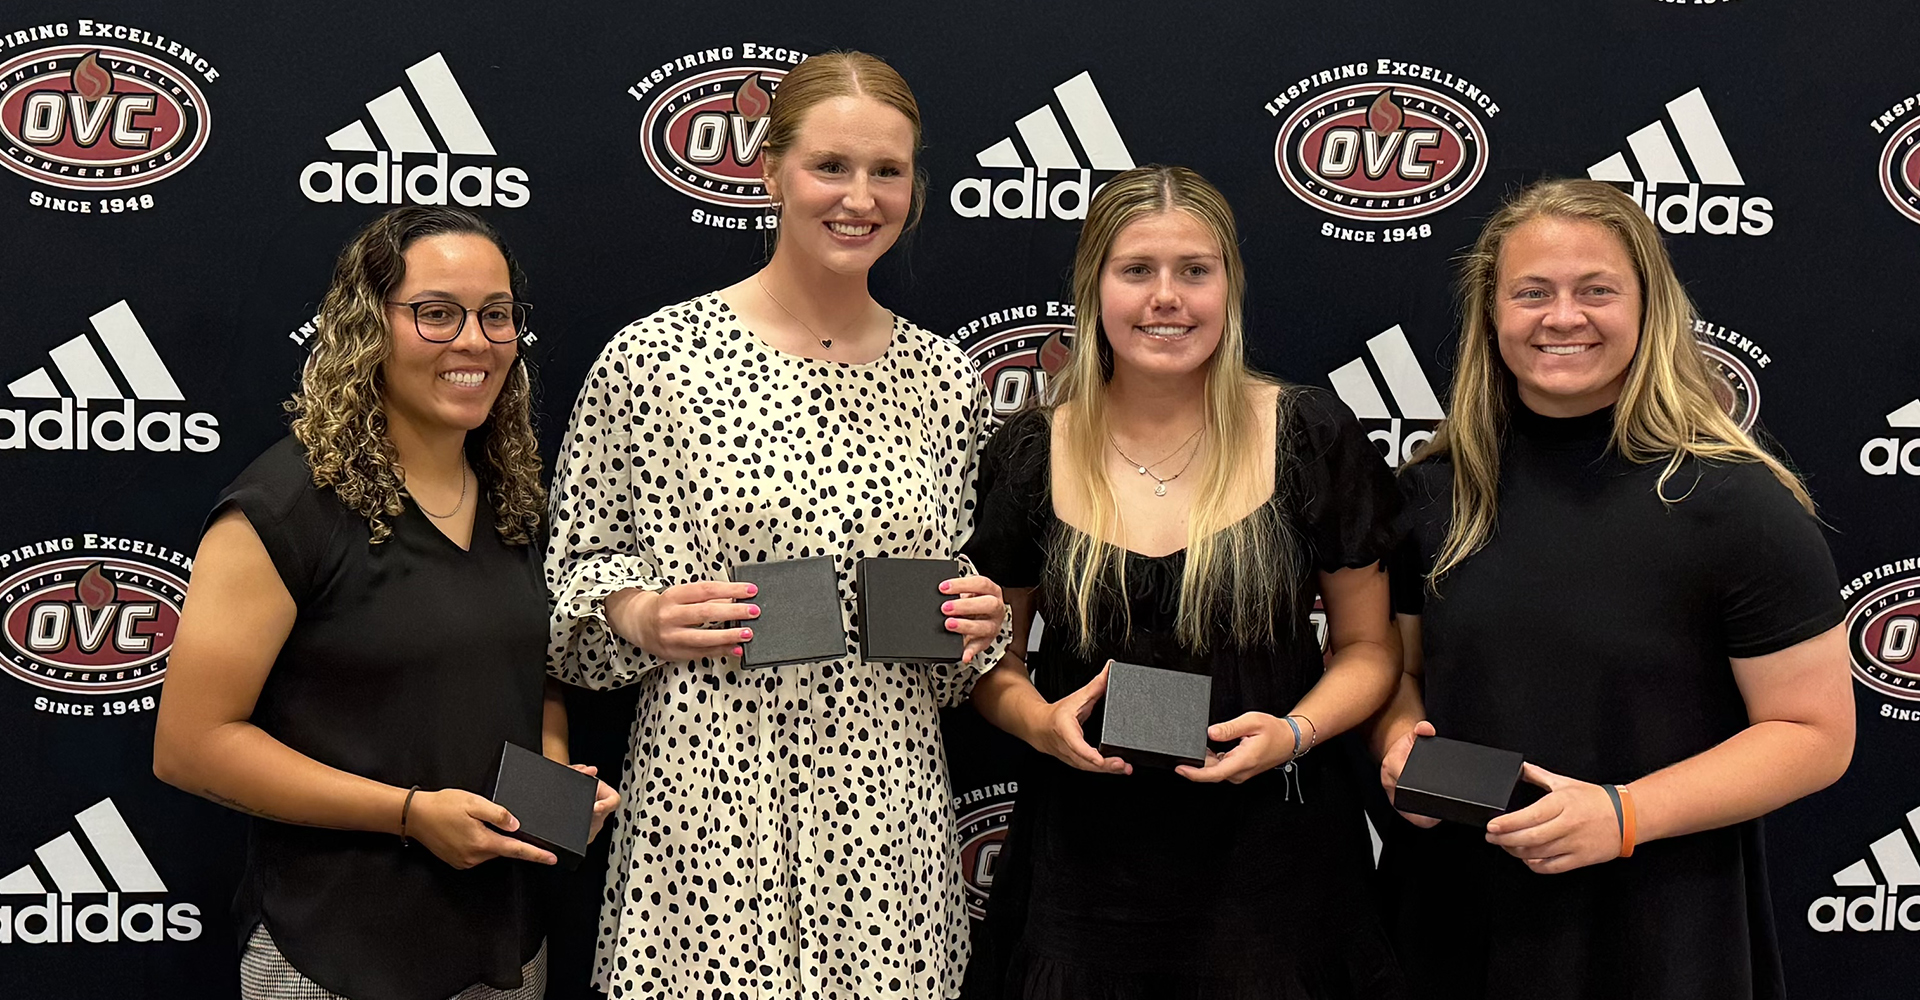 Betts named first team, Kirby second team among All-OVC honors